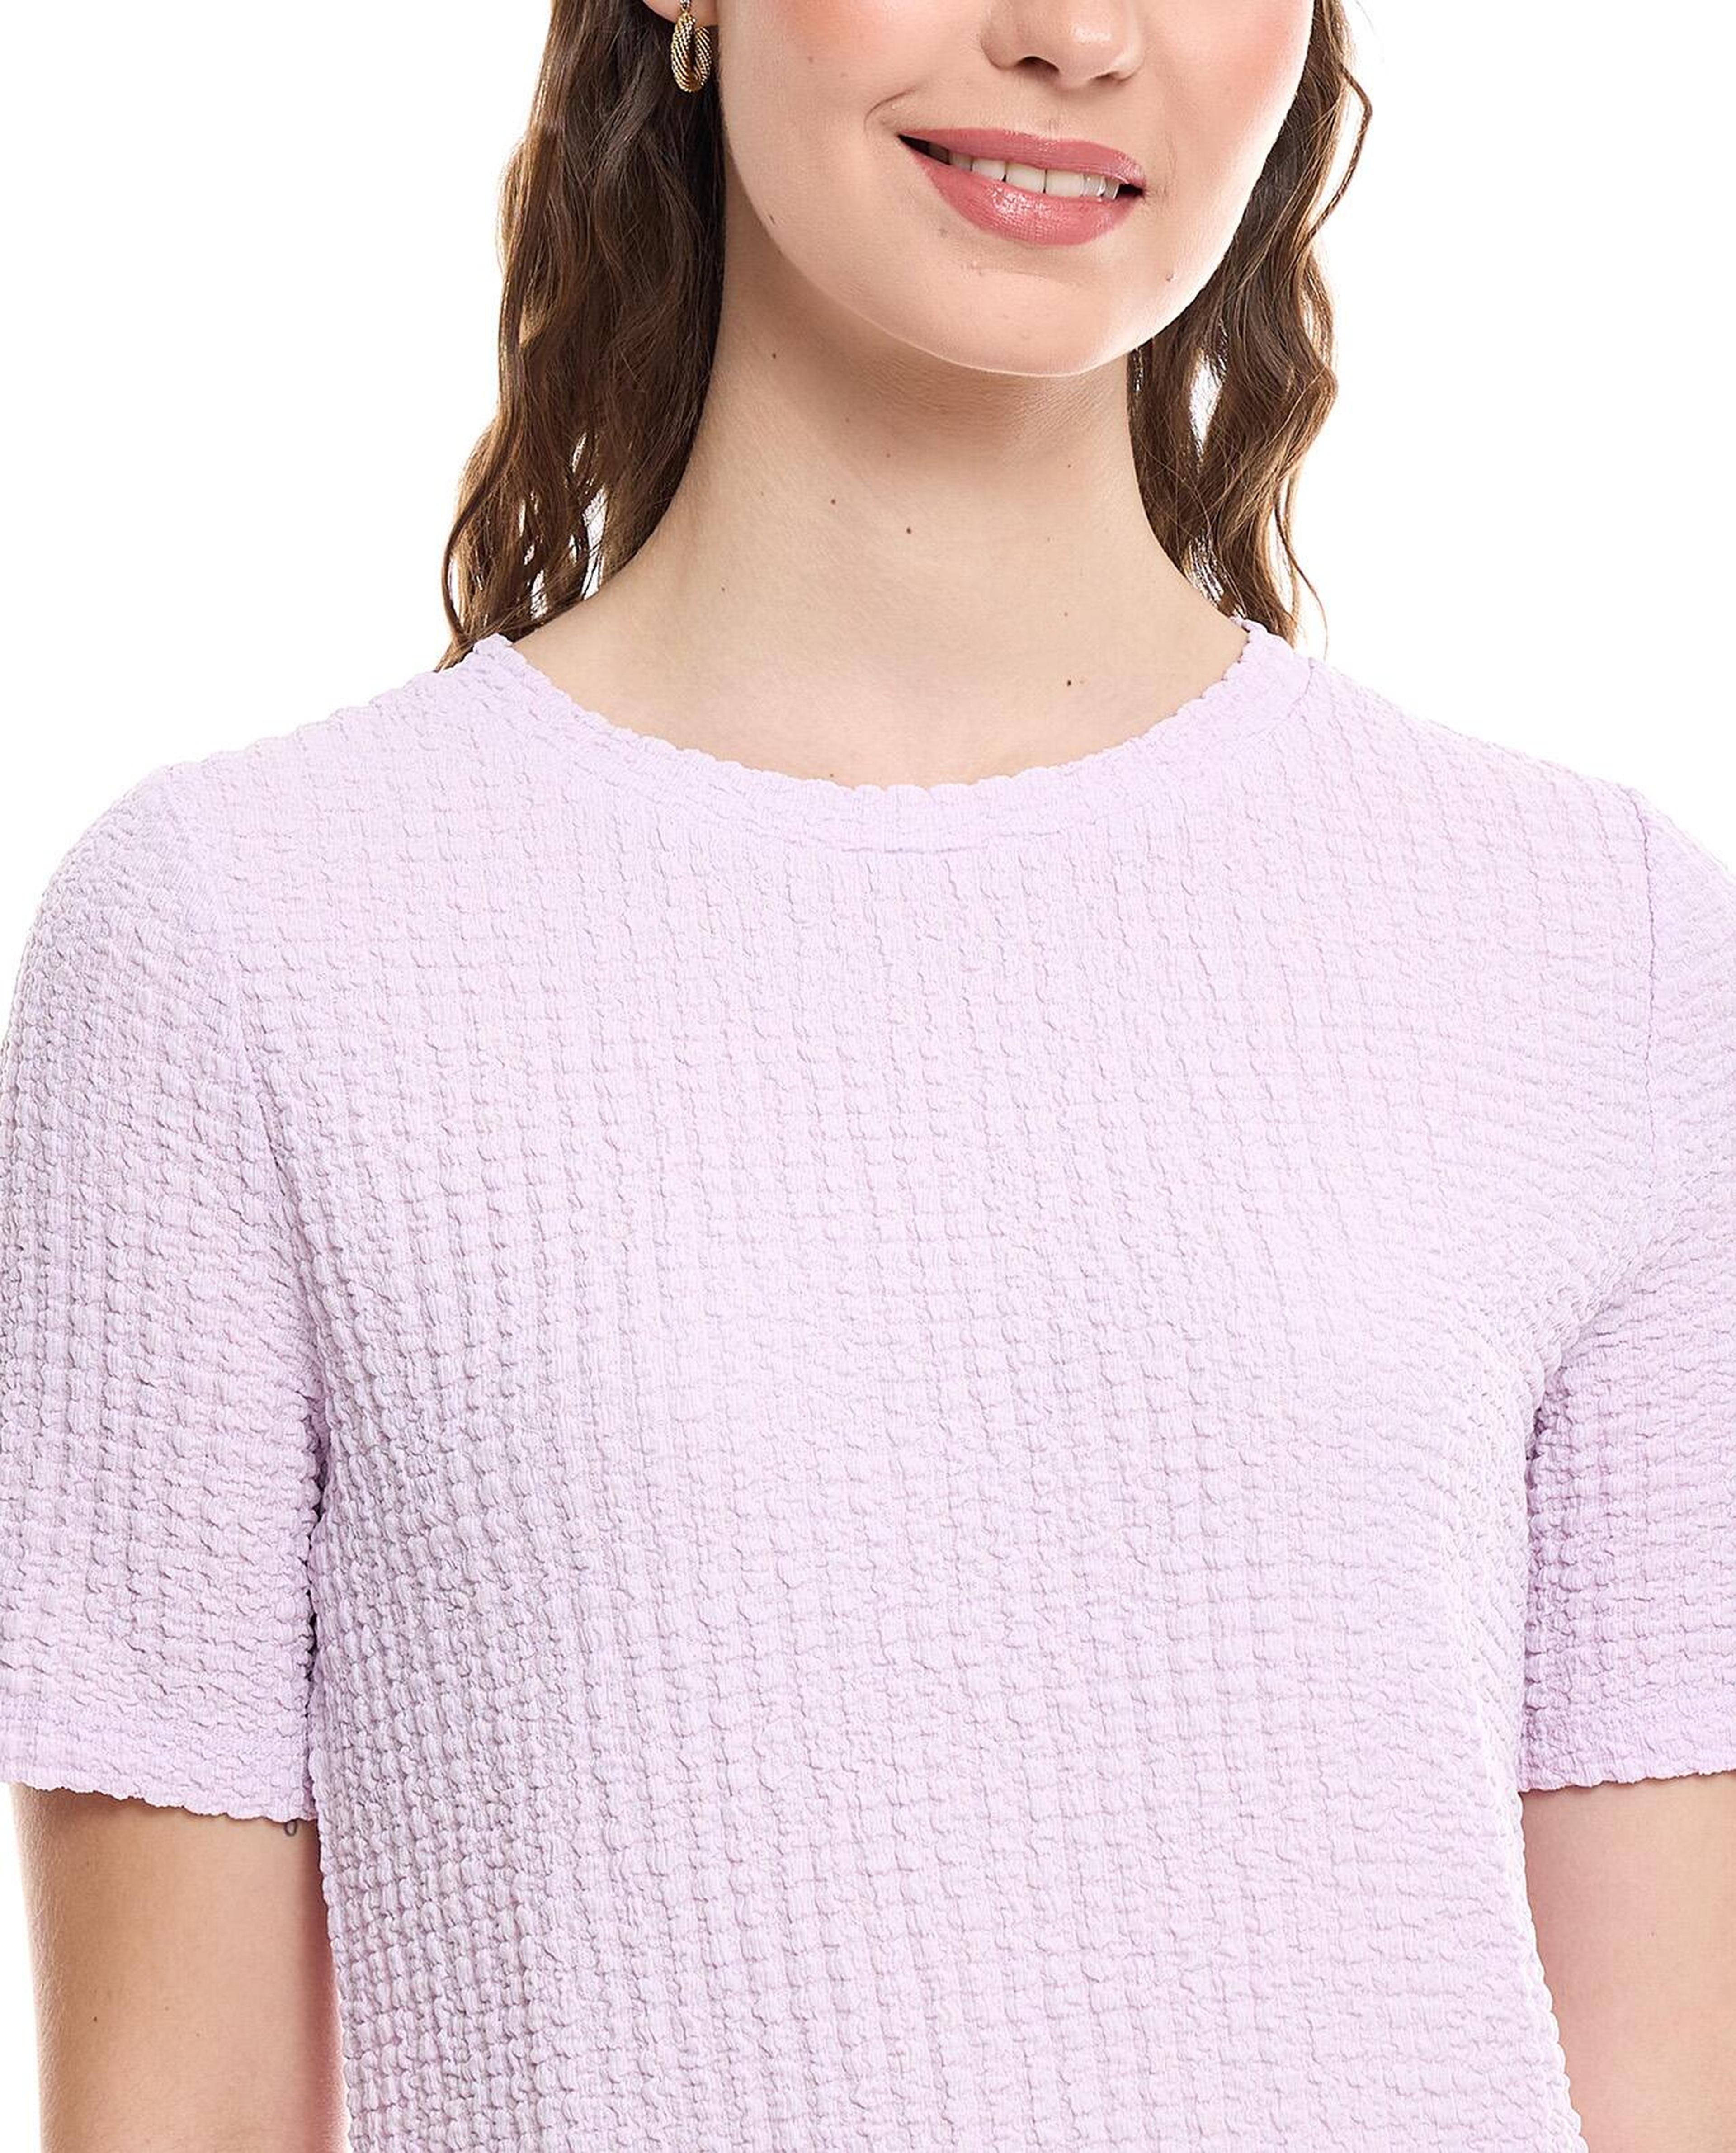 Textured Top with Round Neck and Short Sleeves